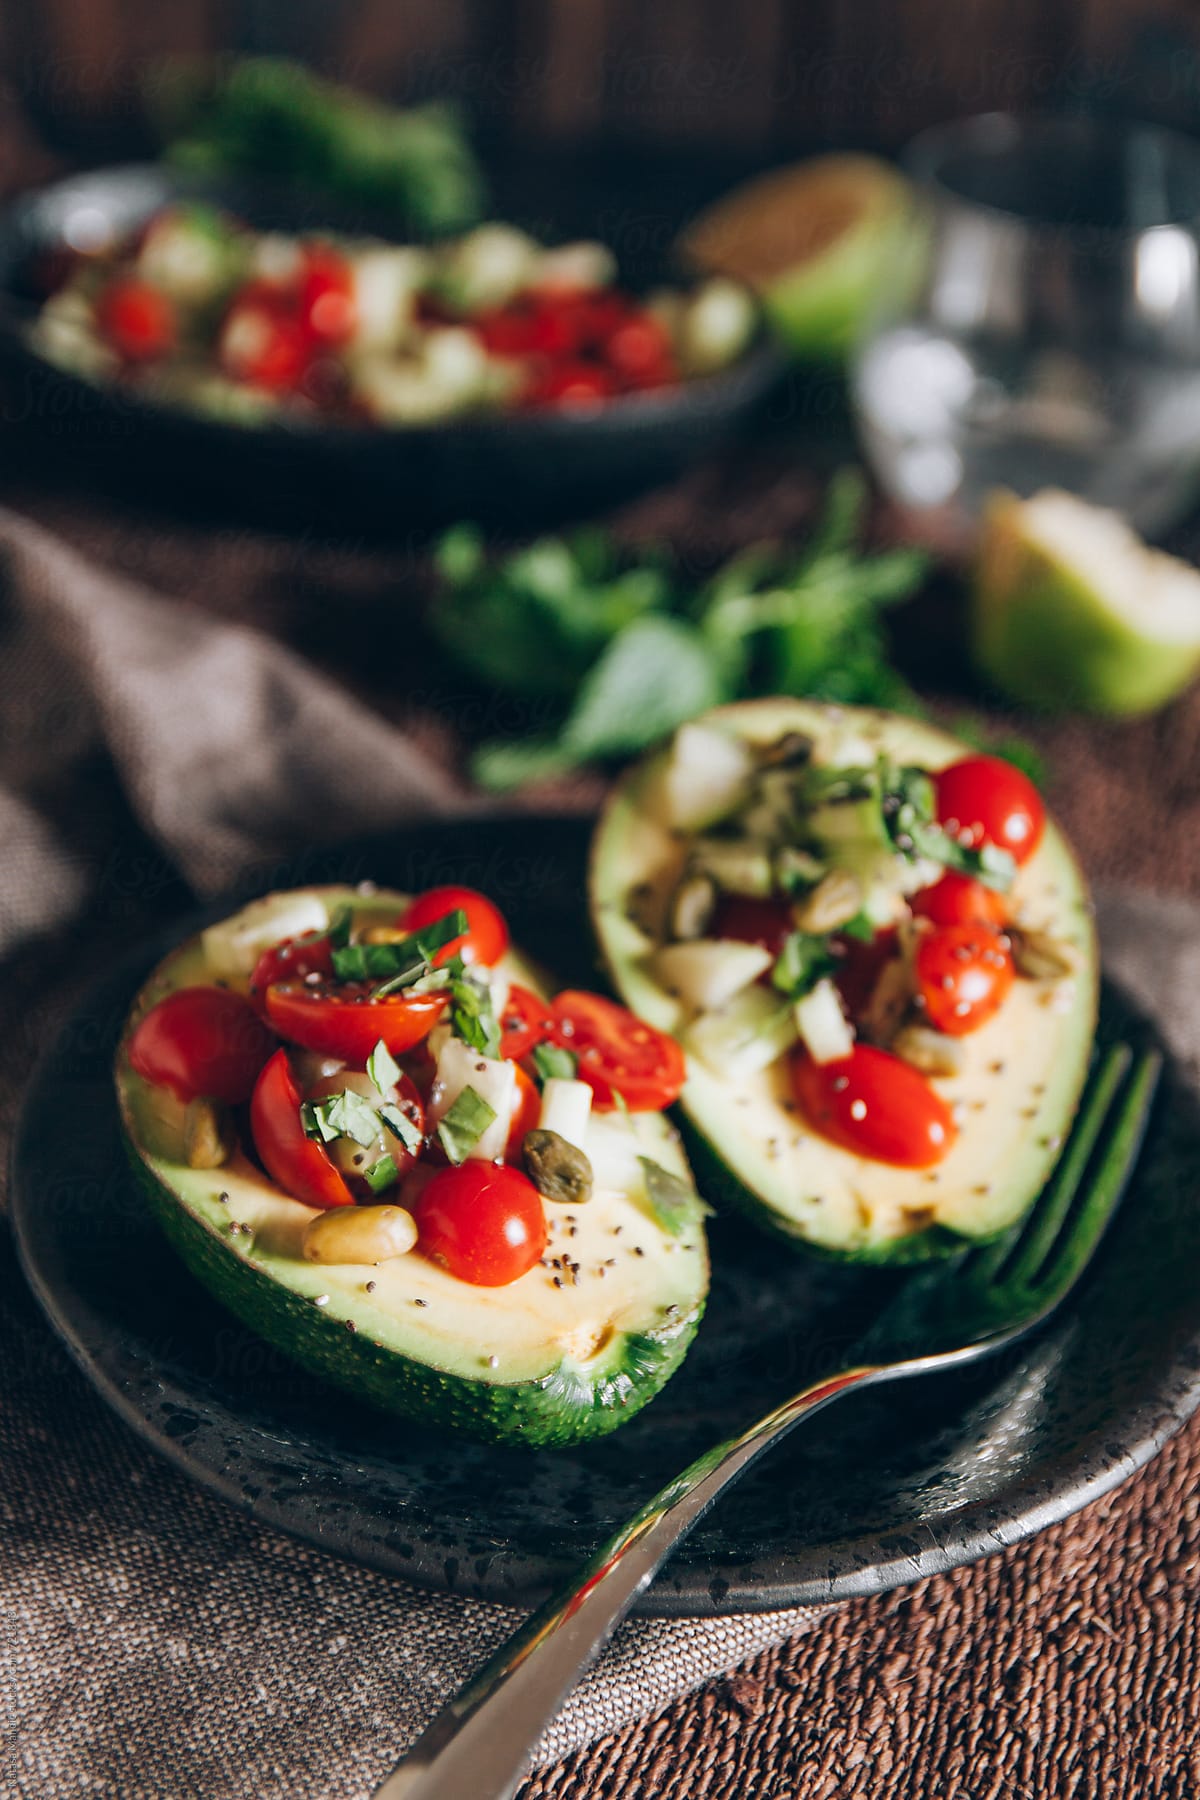 Avocado salad with cherry tomatoes, cucumbers and mint